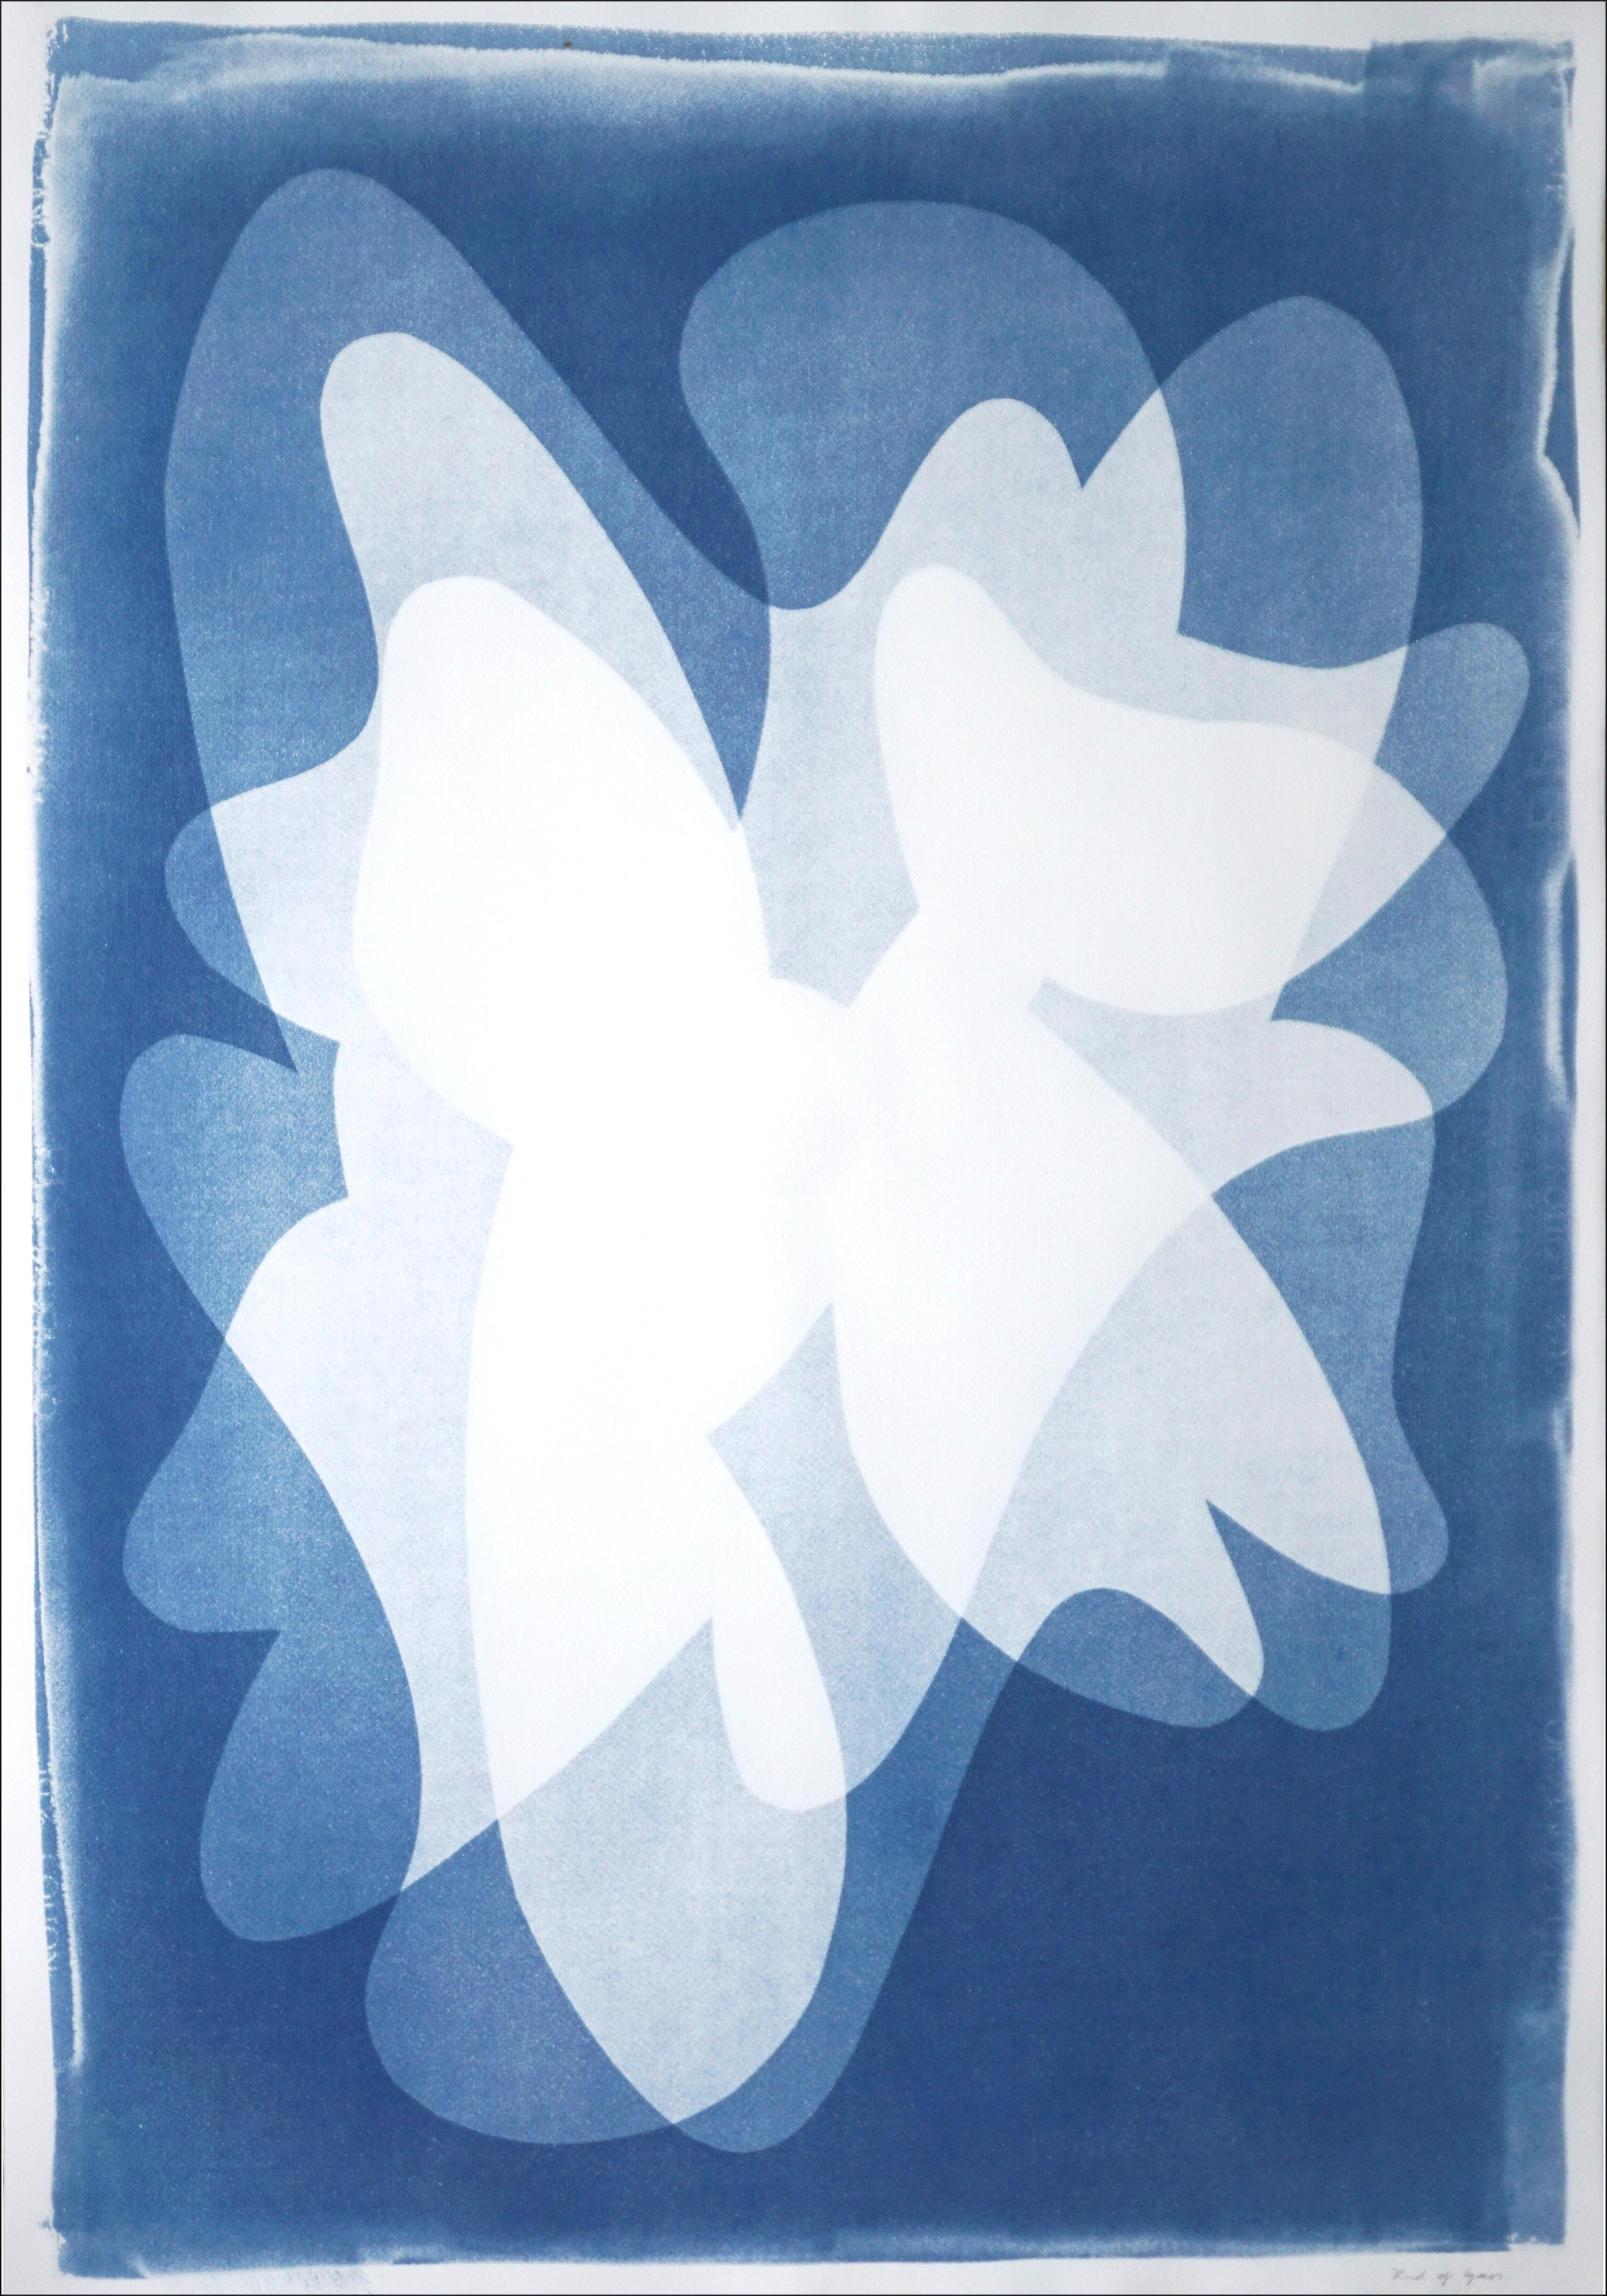 Kind of Cyan Abstract Photograph - Blue Abstract Tulips, Vertical Flowers Shadows in Blue, Handmade Cyanotype 2022